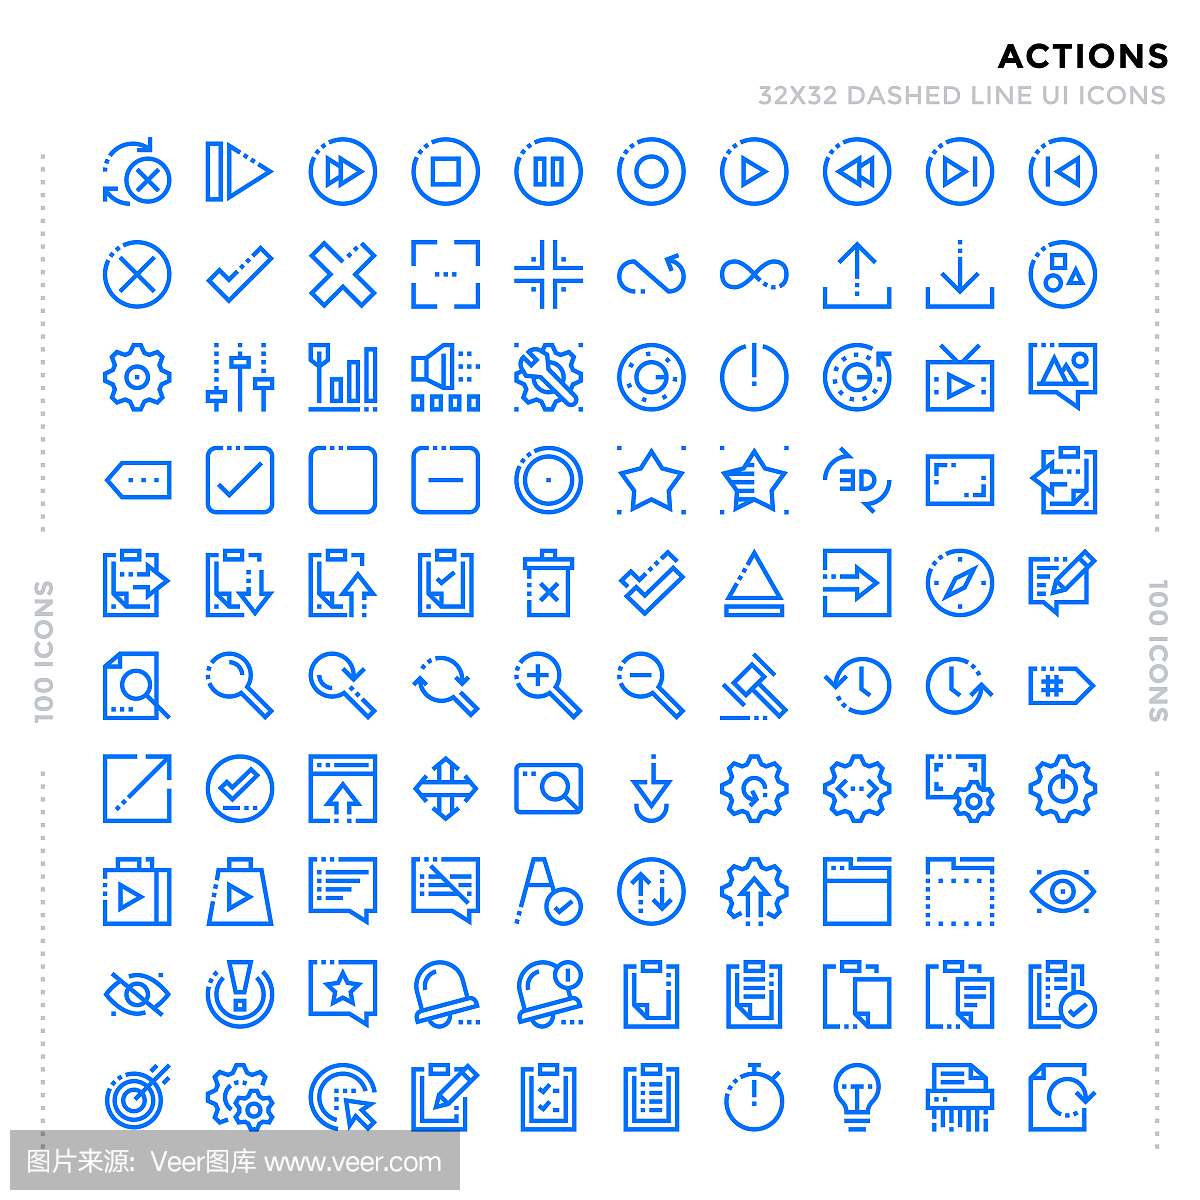 Dashed Outline Icons Pack for UI. Pixel perfect